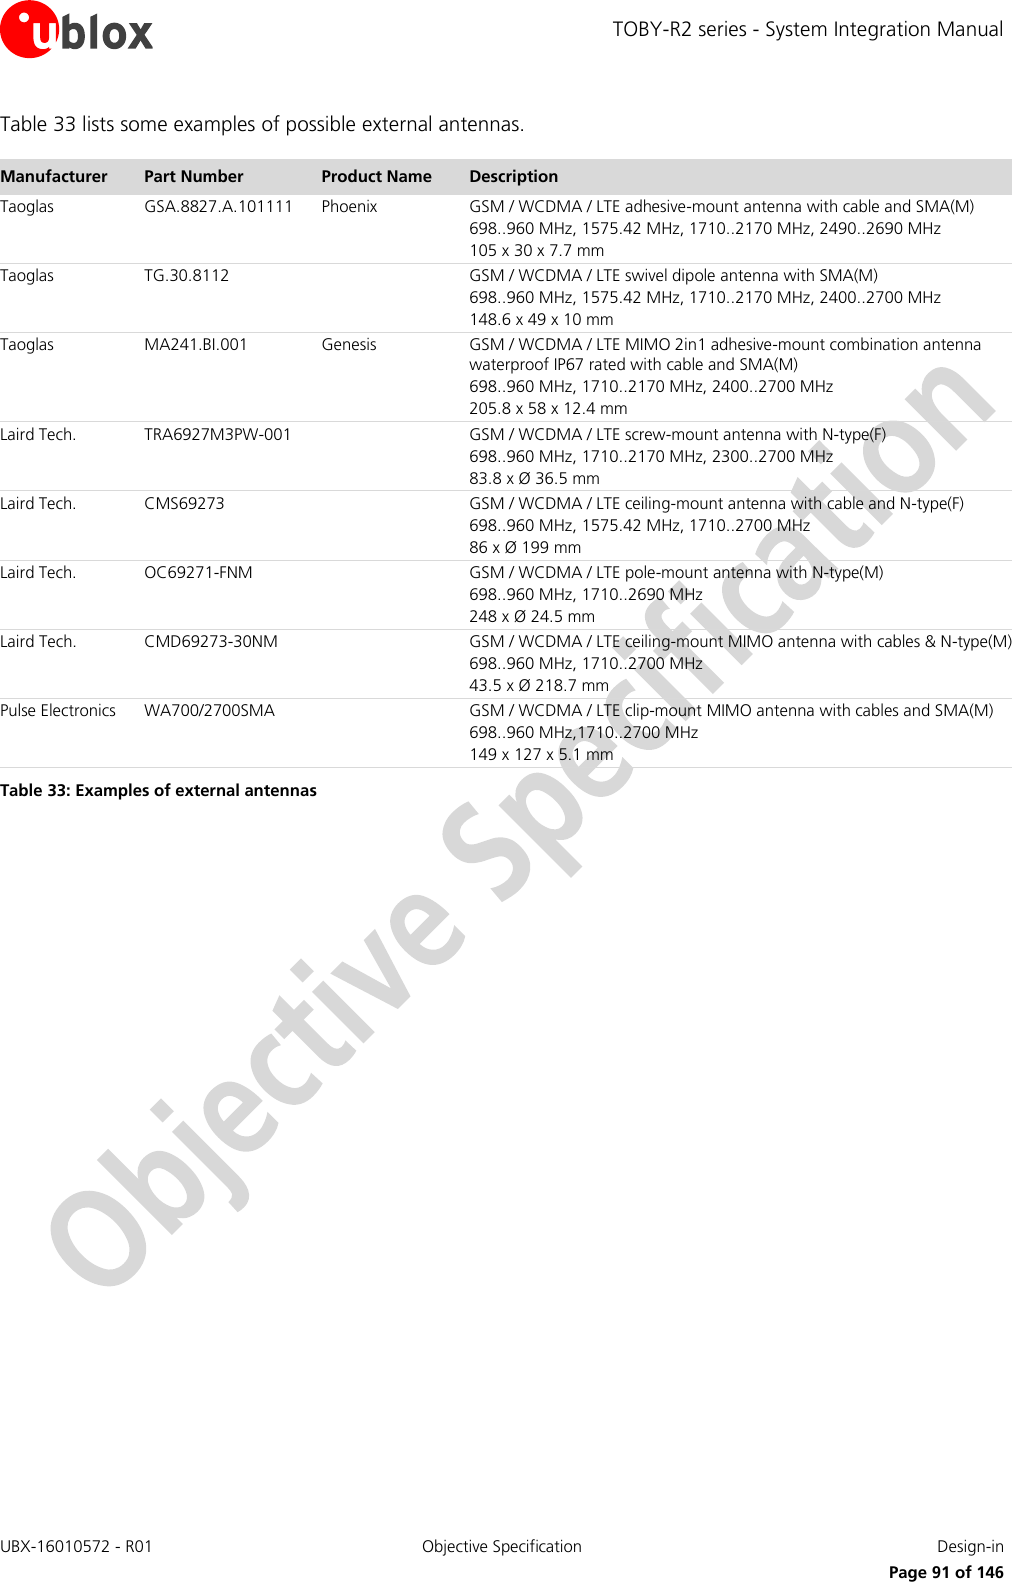 TOBY-R2 series - System Integration Manual UBX-16010572 - R01  Objective Specification  Design-in     Page 91 of 146 Table 33 lists some examples of possible external antennas.  Manufacturer Part Number Product Name Description Taoglas GSA.8827.A.101111  Phoenix GSM / WCDMA / LTE adhesive-mount antenna with cable and SMA(M)  698..960 MHz, 1575.42 MHz, 1710..2170 MHz, 2490..2690 MHz 105 x 30 x 7.7 mm Taoglas TG.30.8112  GSM / WCDMA / LTE swivel dipole antenna with SMA(M)  698..960 MHz, 1575.42 MHz, 1710..2170 MHz, 2400..2700 MHz  148.6 x 49 x 10 mm Taoglas MA241.BI.001 Genesis GSM / WCDMA / LTE MIMO 2in1 adhesive-mount combination antenna waterproof IP67 rated with cable and SMA(M) 698..960 MHz, 1710..2170 MHz, 2400..2700 MHz  205.8 x 58 x 12.4 mm Laird Tech. TRA6927M3PW-001  GSM / WCDMA / LTE screw-mount antenna with N-type(F)  698..960 MHz, 1710..2170 MHz, 2300..2700 MHz  83.8 x Ø 36.5 mm Laird Tech. CMS69273  GSM / WCDMA / LTE ceiling-mount antenna with cable and N-type(F)  698..960 MHz, 1575.42 MHz, 1710..2700 MHz  86 x Ø 199 mm Laird Tech. OC69271-FNM  GSM / WCDMA / LTE pole-mount antenna with N-type(M)  698..960 MHz, 1710..2690 MHz 248 x Ø 24.5 mm Laird Tech. CMD69273-30NM  GSM / WCDMA / LTE ceiling-mount MIMO antenna with cables &amp; N-type(M)  698..960 MHz, 1710..2700 MHz  43.5 x Ø 218.7 mm Pulse Electronics WA700/2700SMA  GSM / WCDMA / LTE clip-mount MIMO antenna with cables and SMA(M)  698..960 MHz,1710..2700 MHz 149 x 127 x 5.1 mm Table 33: Examples of external antennas   